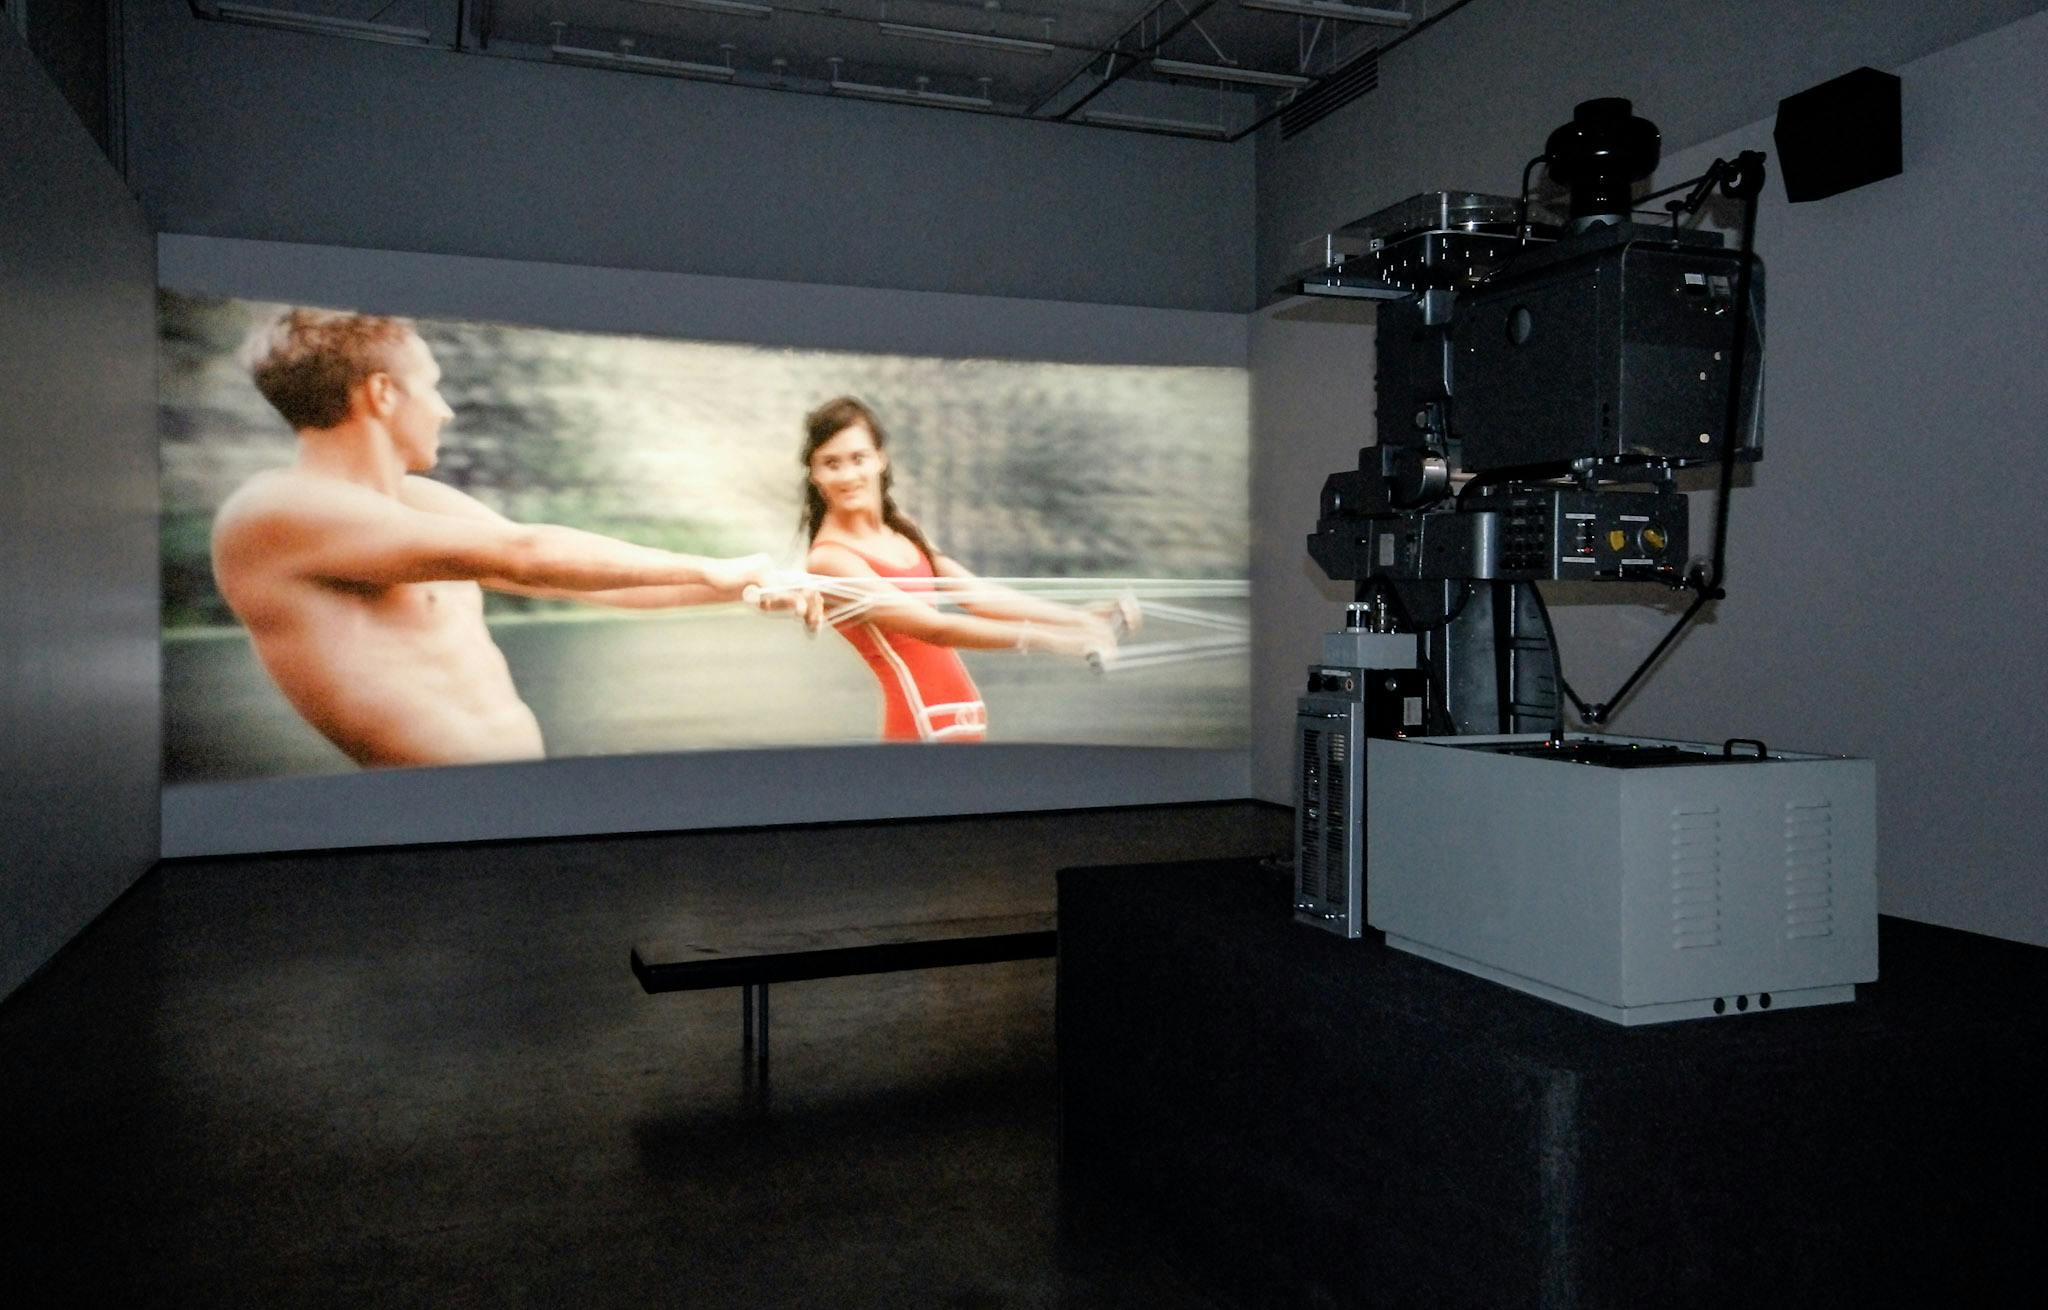 A film is projected on the wall in a gallery. The film depicts a man and woman in swimsuits. A silver film projector placed on the floor close to the gallery entrance projects this film to the wall. 